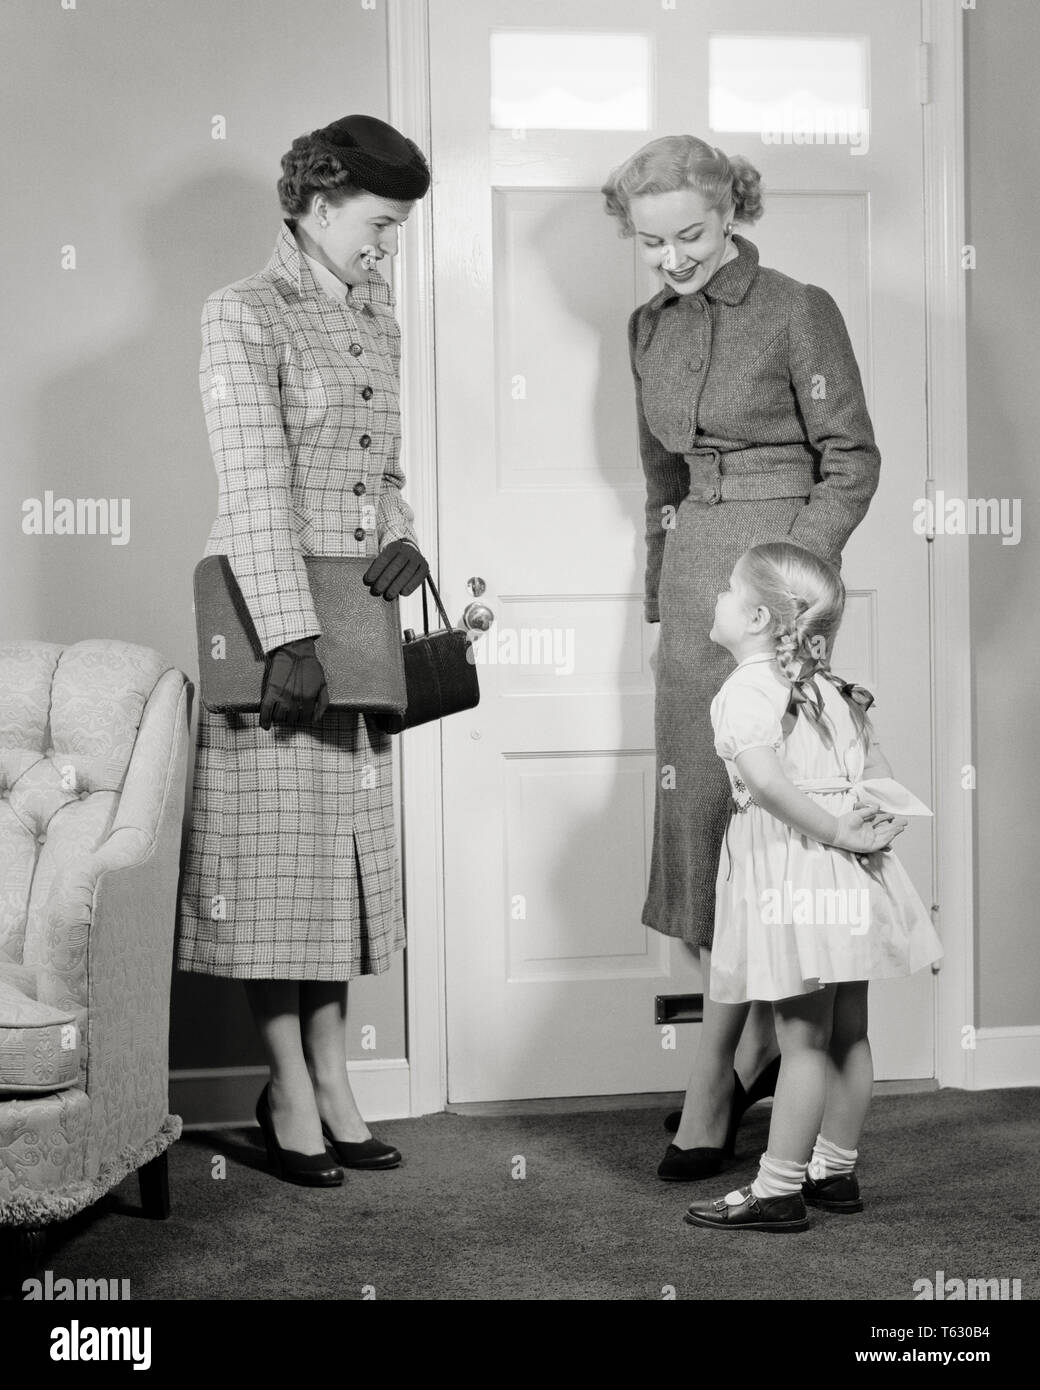 1950s MOTHER AND DAUGHTER  AT DOOR WELCOMING VISITING WOMAN SALESPERSON  - s1030 HAR001 HARS 1 GREETING JUVENILE STYLE WELCOME COMMUNICATION LIFESTYLE SALESPERSON FEMALES HOME LIFE COPY SPACE FULL-LENGTH LADIES DAUGHTERS PERSONS CONFIDENCE B&W BUSINESSWOMAN GREET SELLING HAPPINESS STYLES AND NETWORKING MARY JANE OPPORTUNITY OCCUPATIONS WELCOMING CONNECTION VISITOR INTRODUCTION SALESWOMAN SALESWOMEN STYLISH VISIT VISITING BUSINESSWOMEN BRAIDS COOPERATION FASHIONS JUVENILES MID-ADULT MID-ADULT WOMAN MOMS PIGTAILS TOGETHERNESS BLACK AND WHITE CAUCASIAN ETHNICITY HAR001 OLD FASHIONED Stock Photo